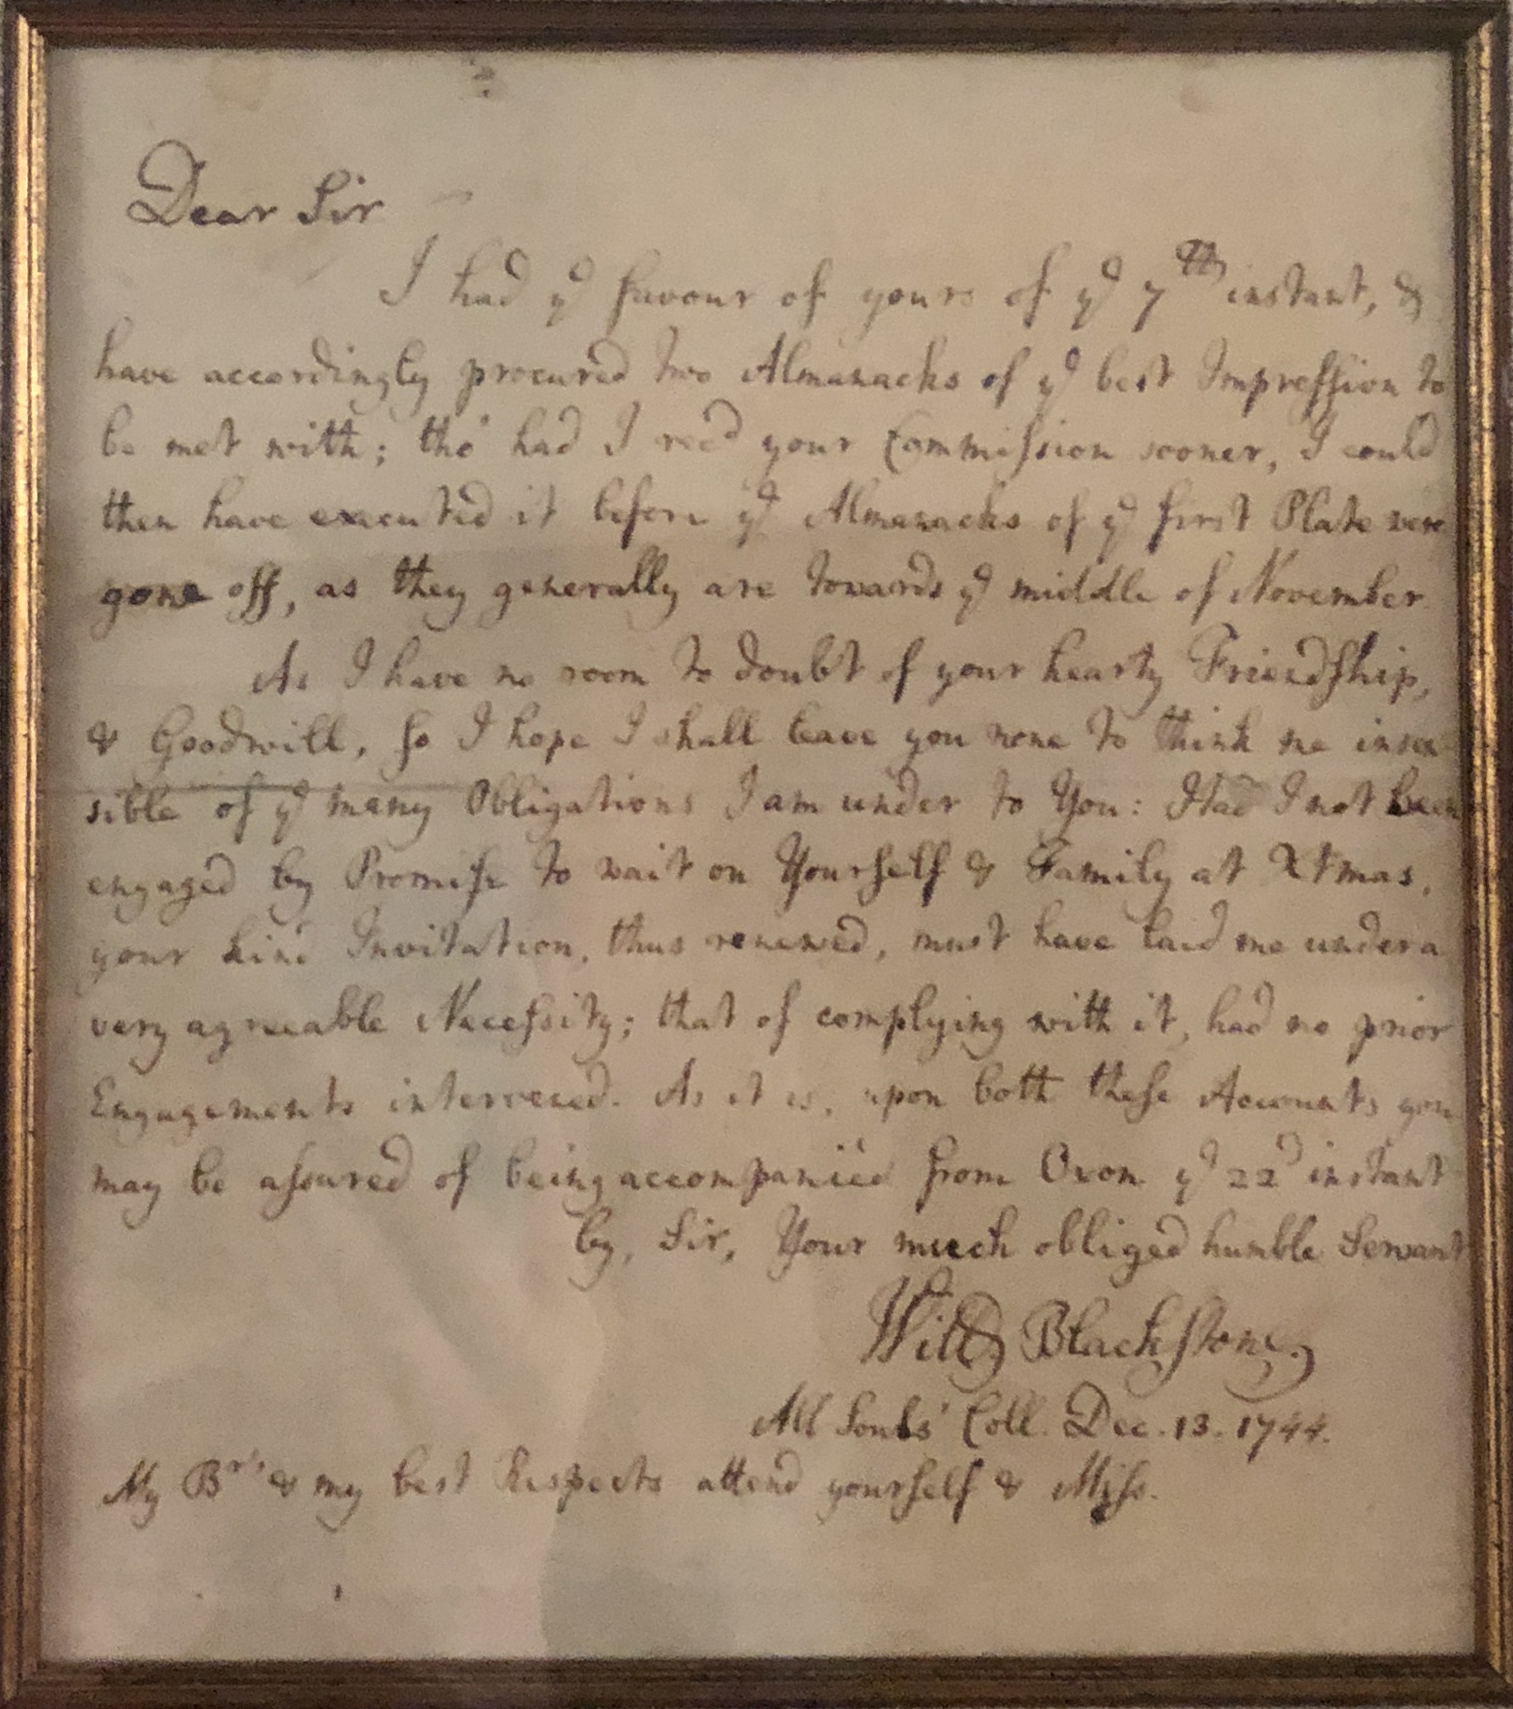 Detail of letter of December 13, 1744 from William Blackstone